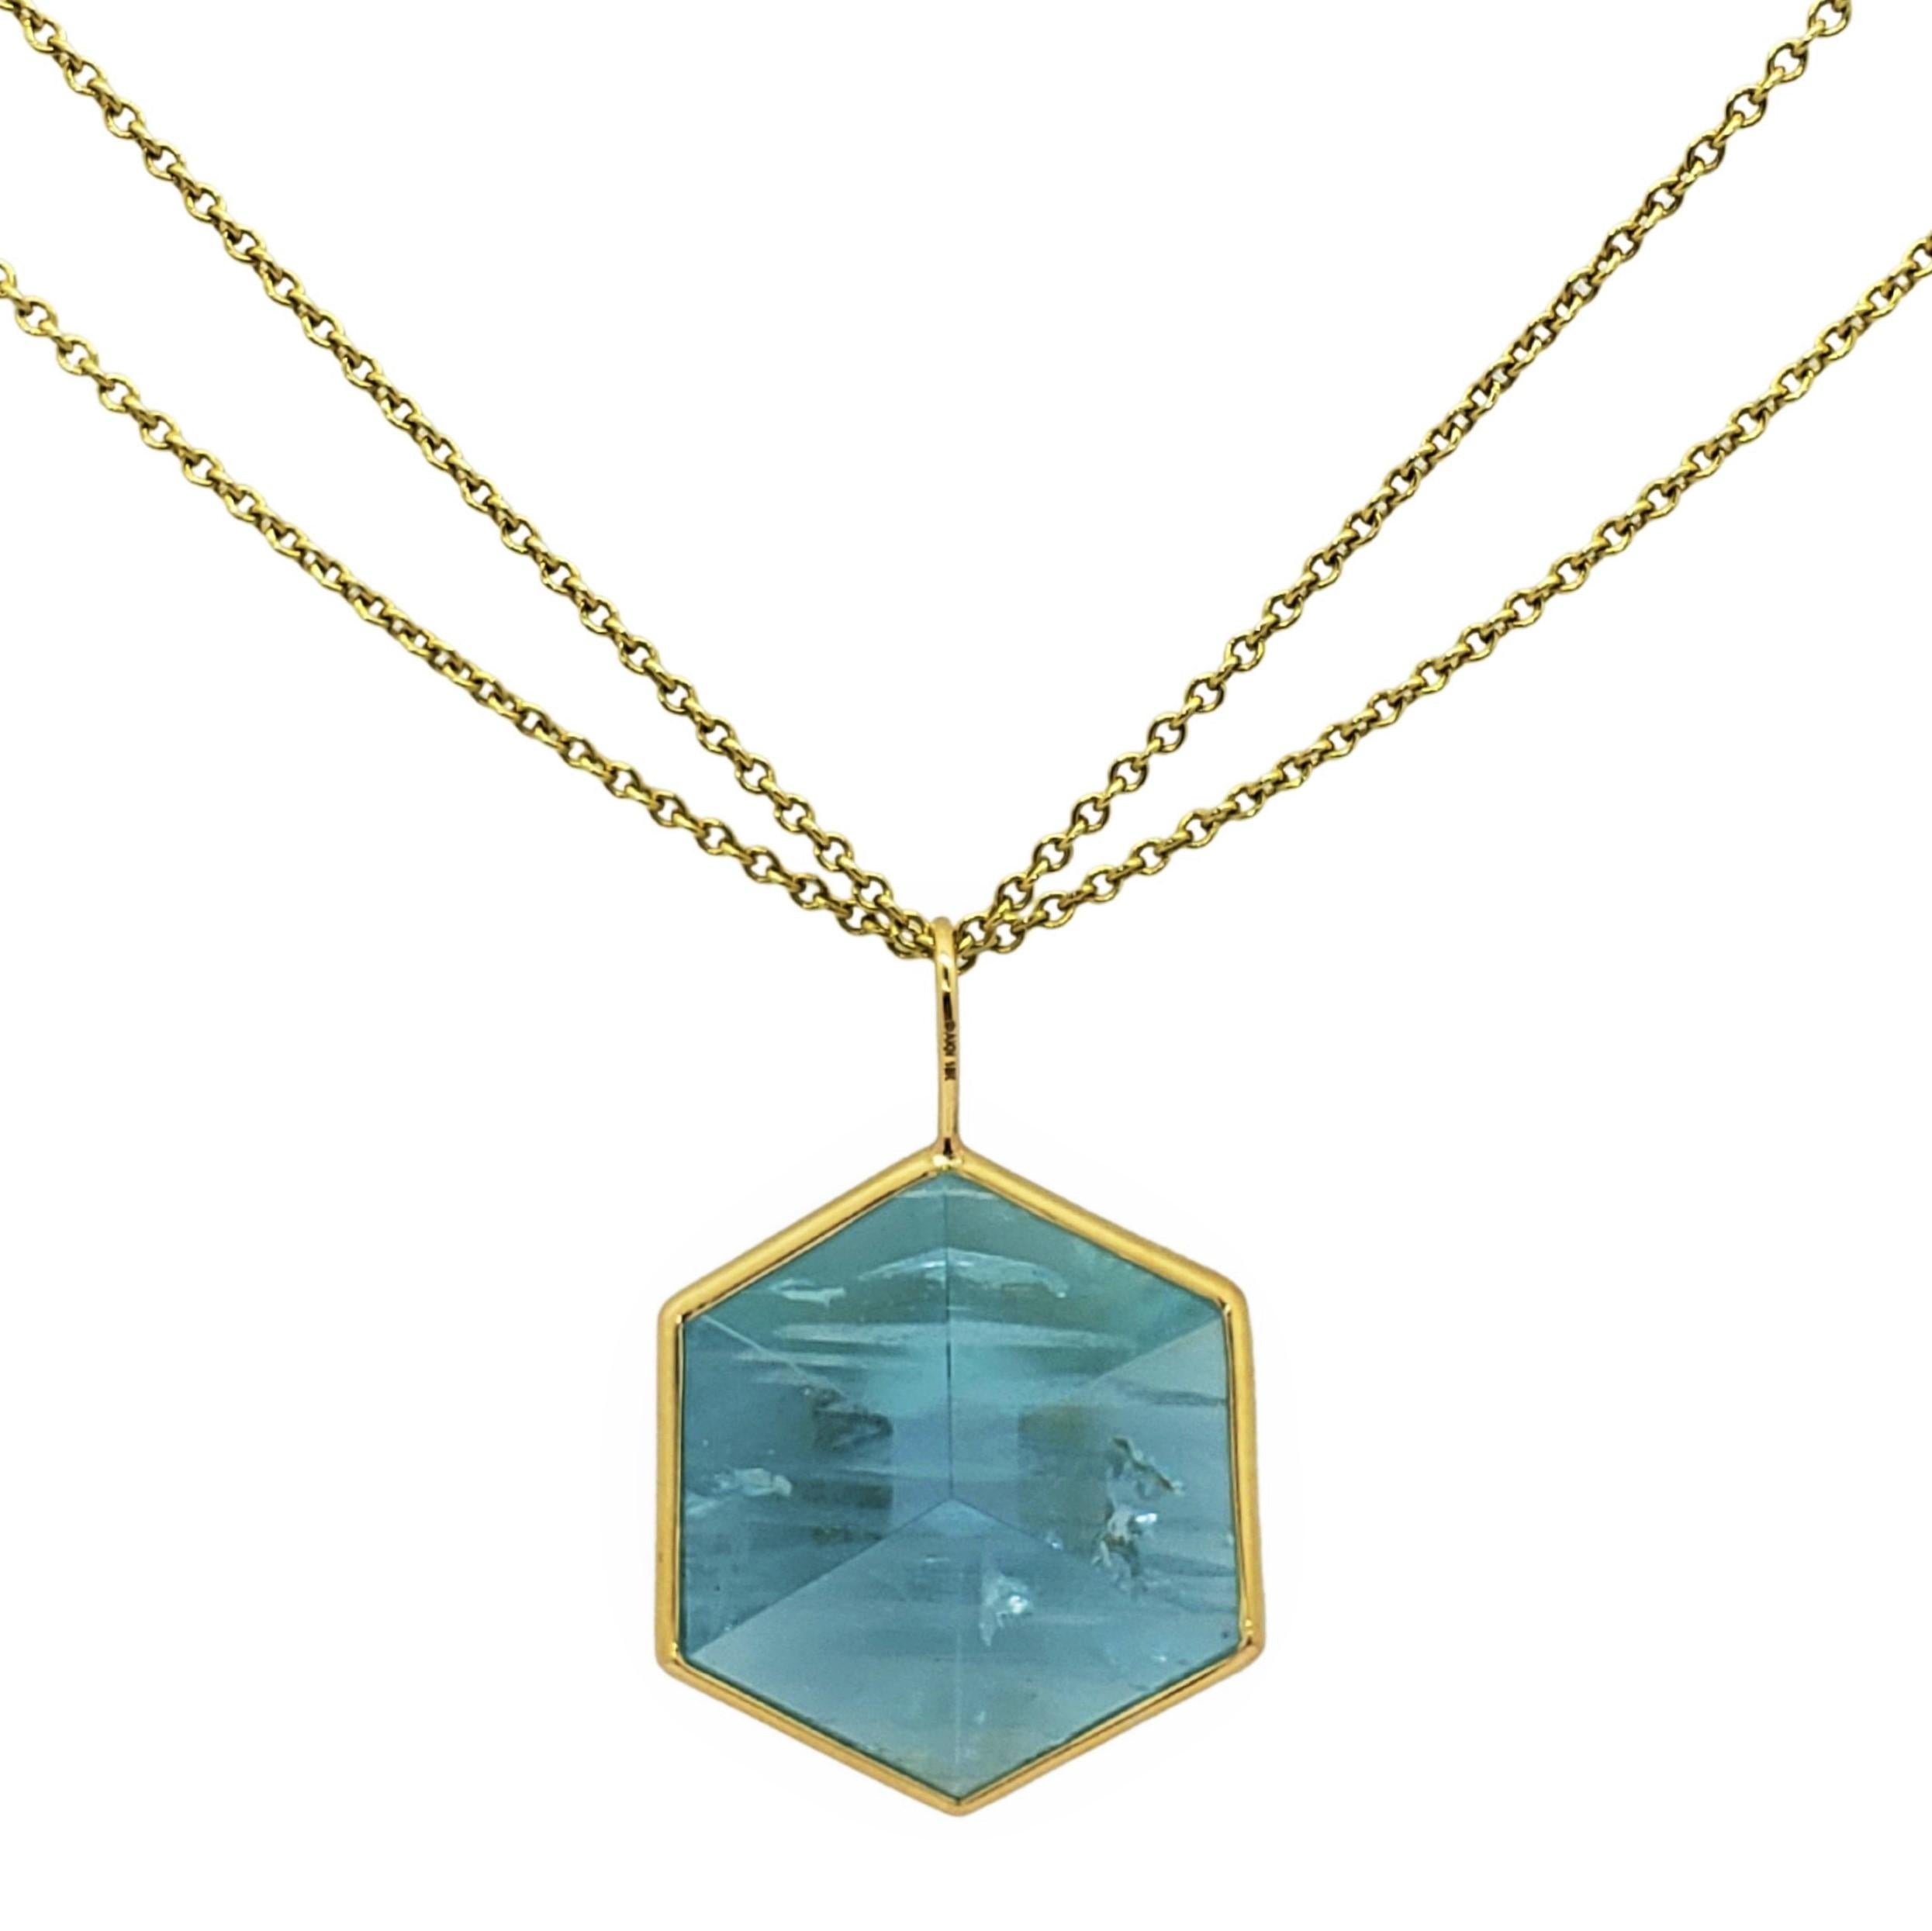 Non-gender Unique Natural Brazilian Aquamarine in 3D cut wrapped in a handmade 18K yellow gold bezel statement necklace. The new 3D cut is an optical illusion if viewed from different angles. In one position, it appears to be a cube, but then it